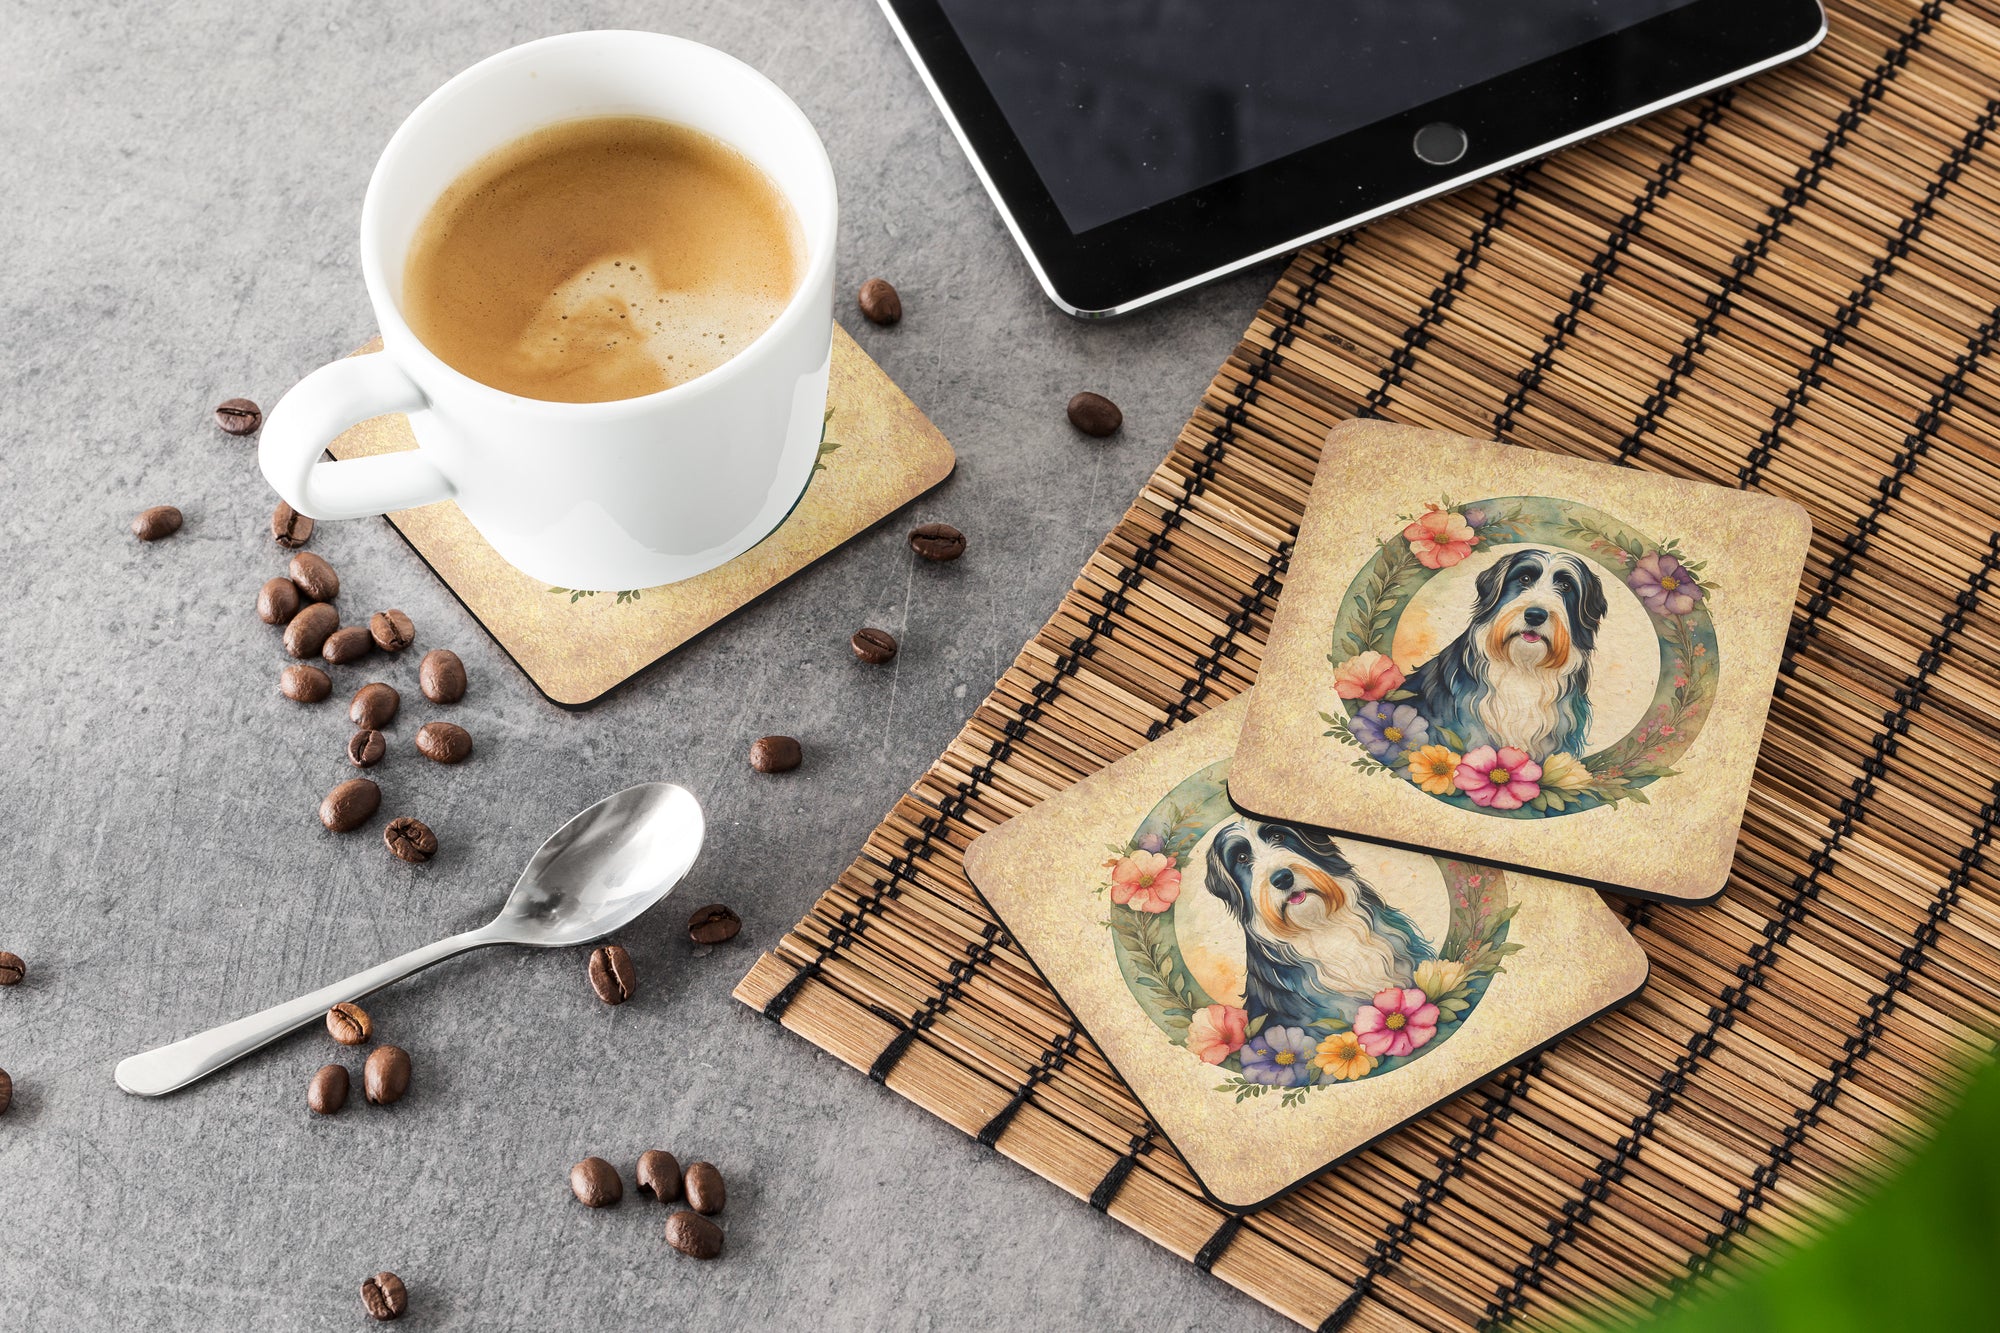 Bearded Collie and Flowers Foam Coasters